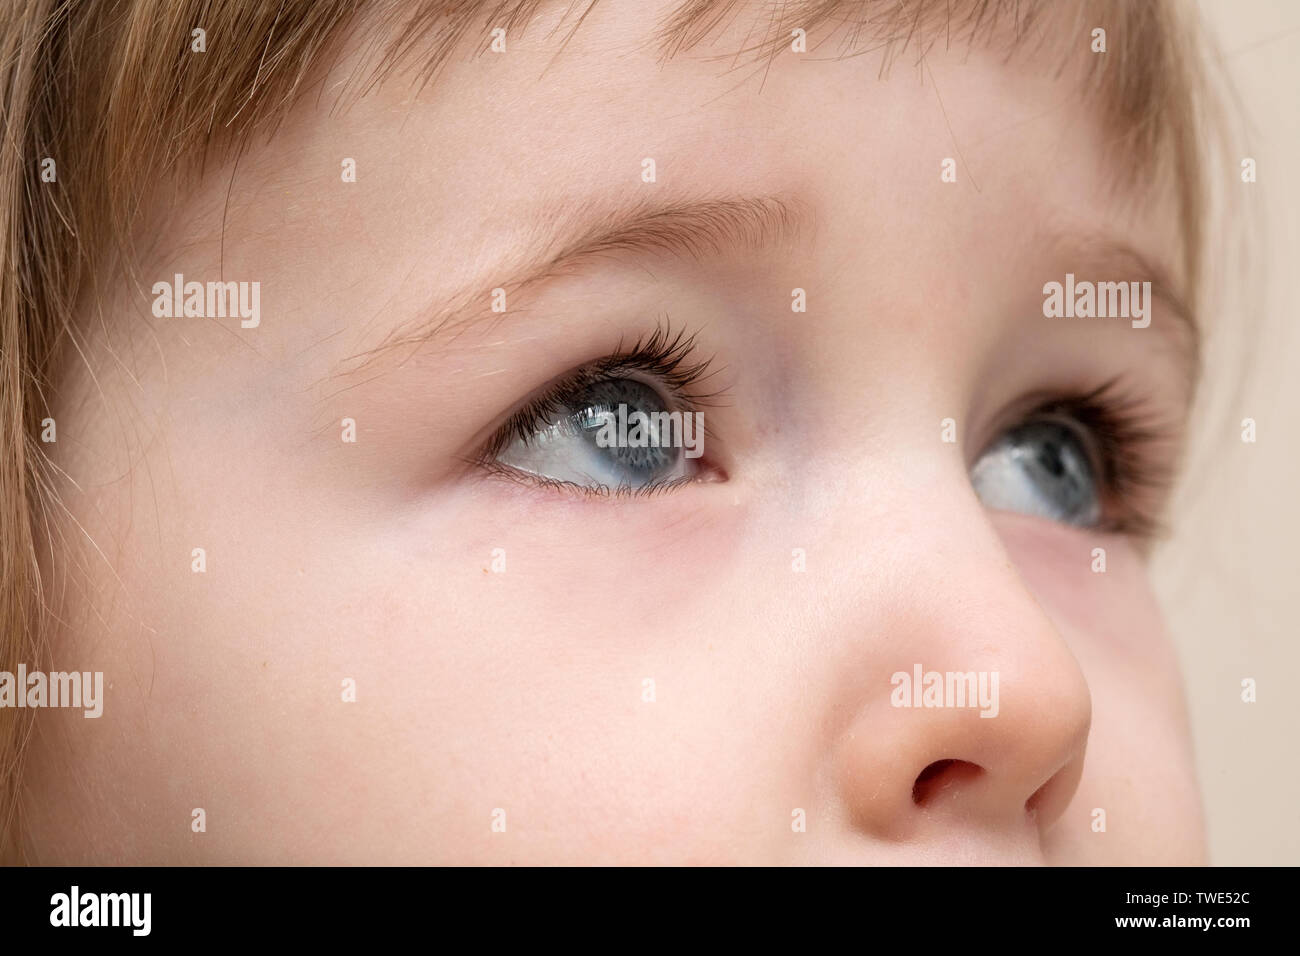 serious grey eyes of white three years old child face closeup view Stock Photo